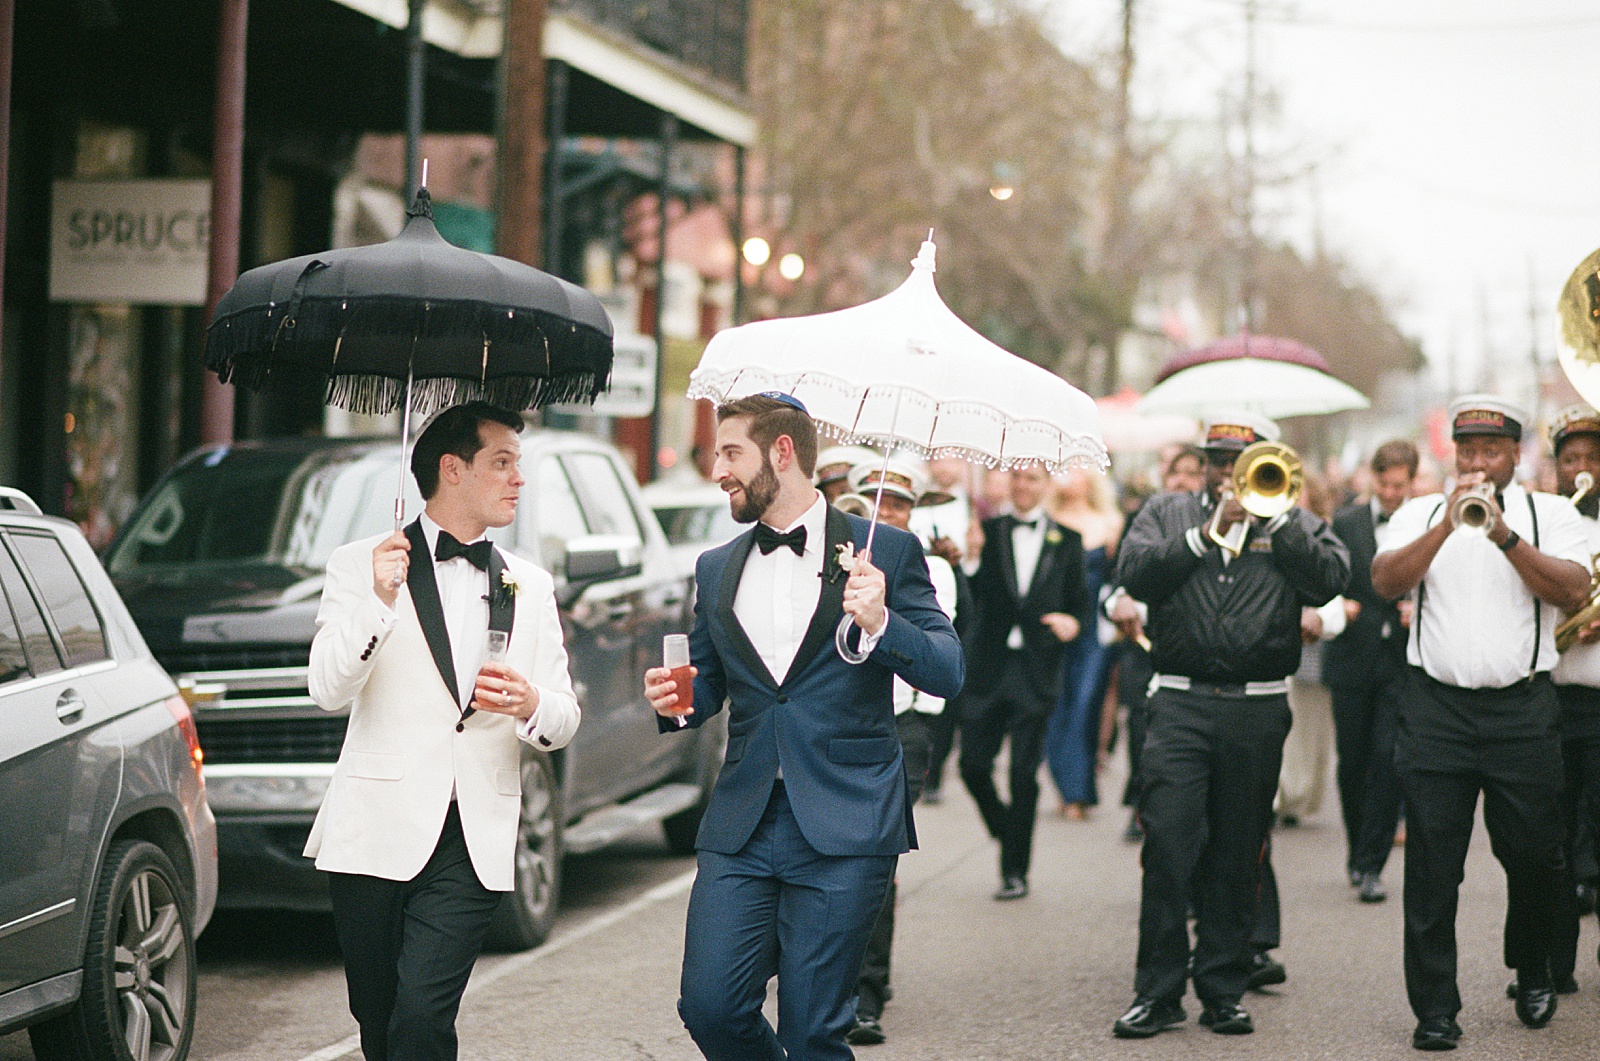 Two grooms lead a New Orleans wedding parade in wedding portraits on film photography.